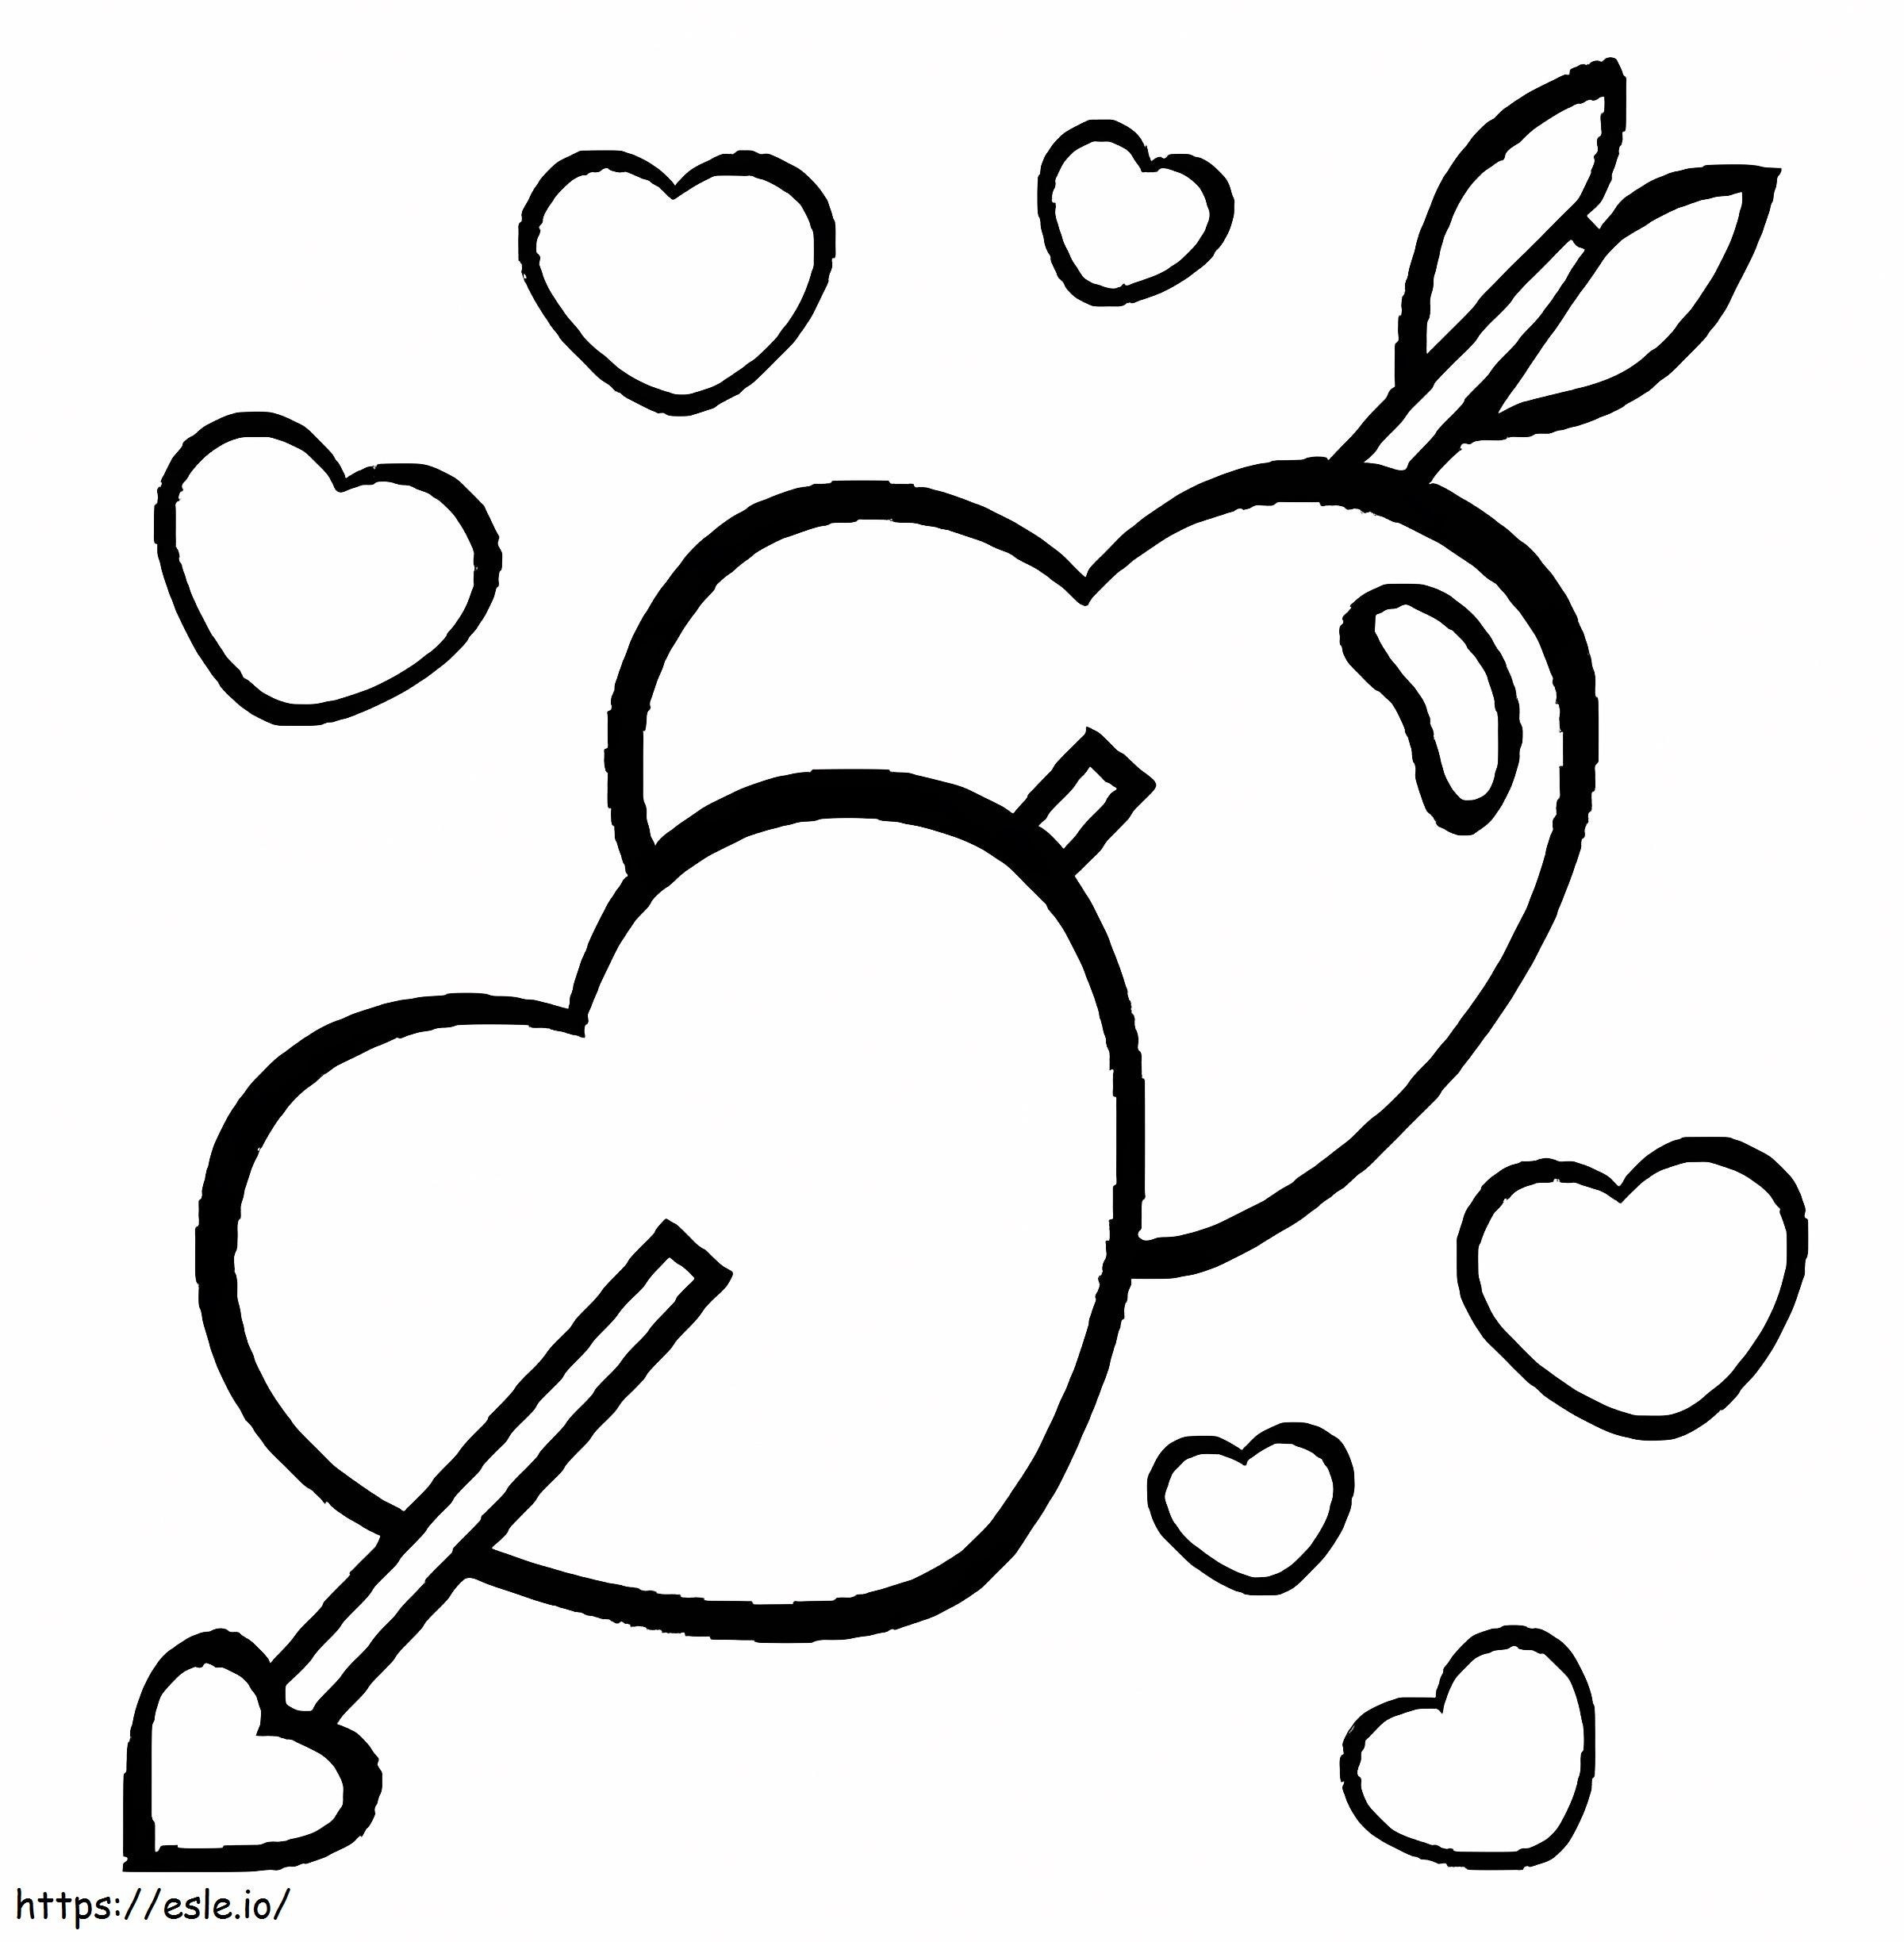 Cute Valentine Hearts coloring page